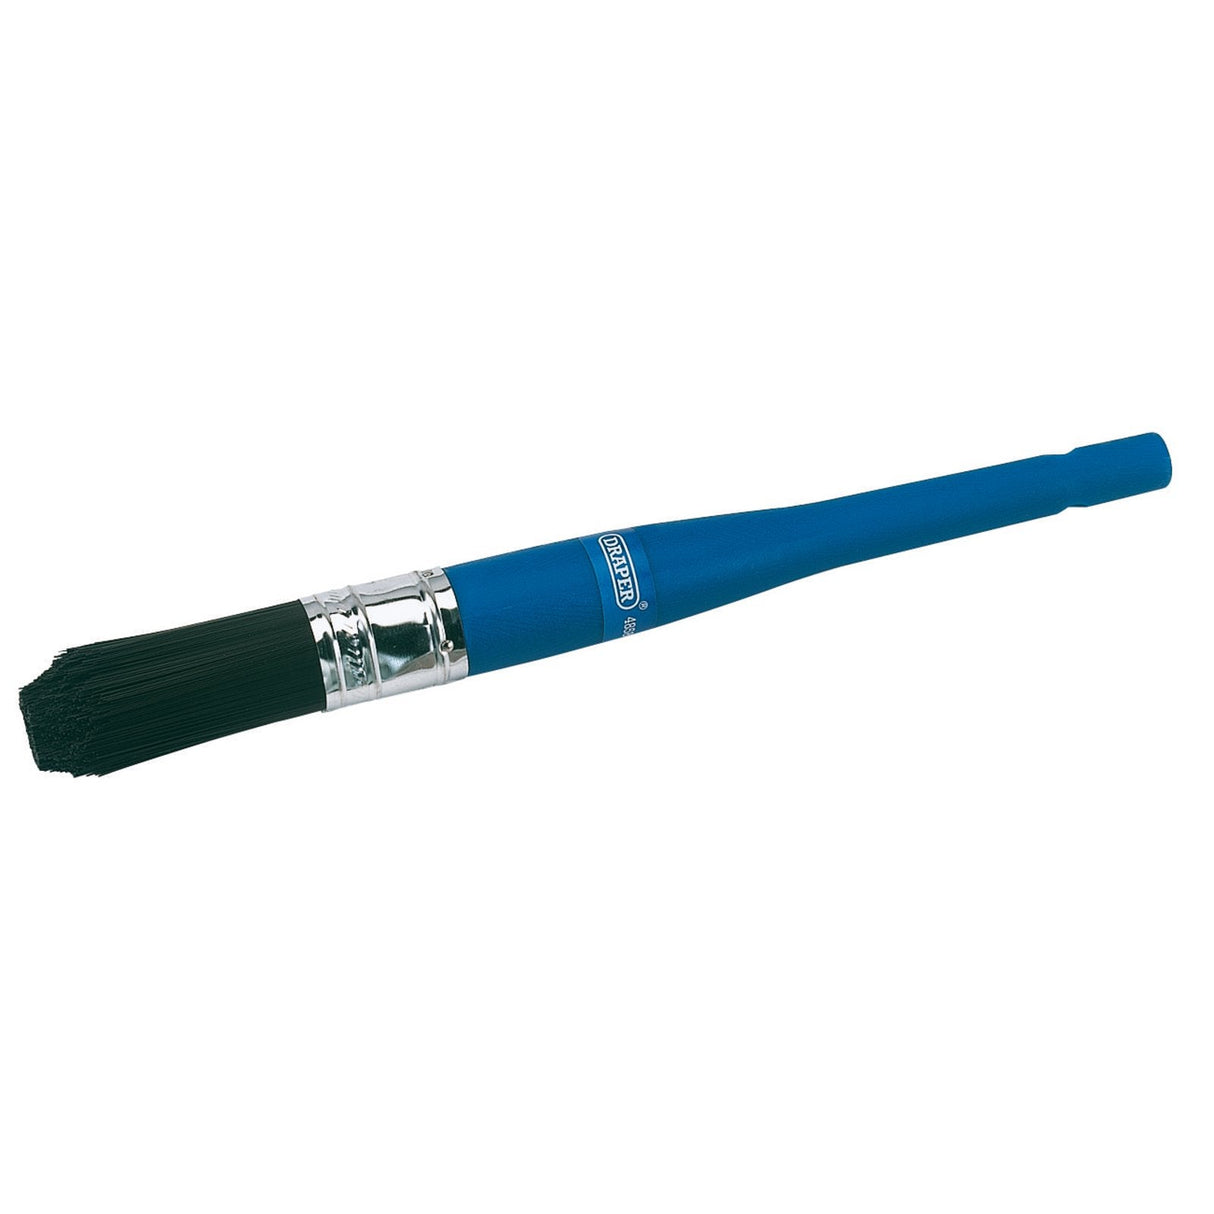 Draper Parts Cleaning Brush, 275mm - 4858 - Farming Parts